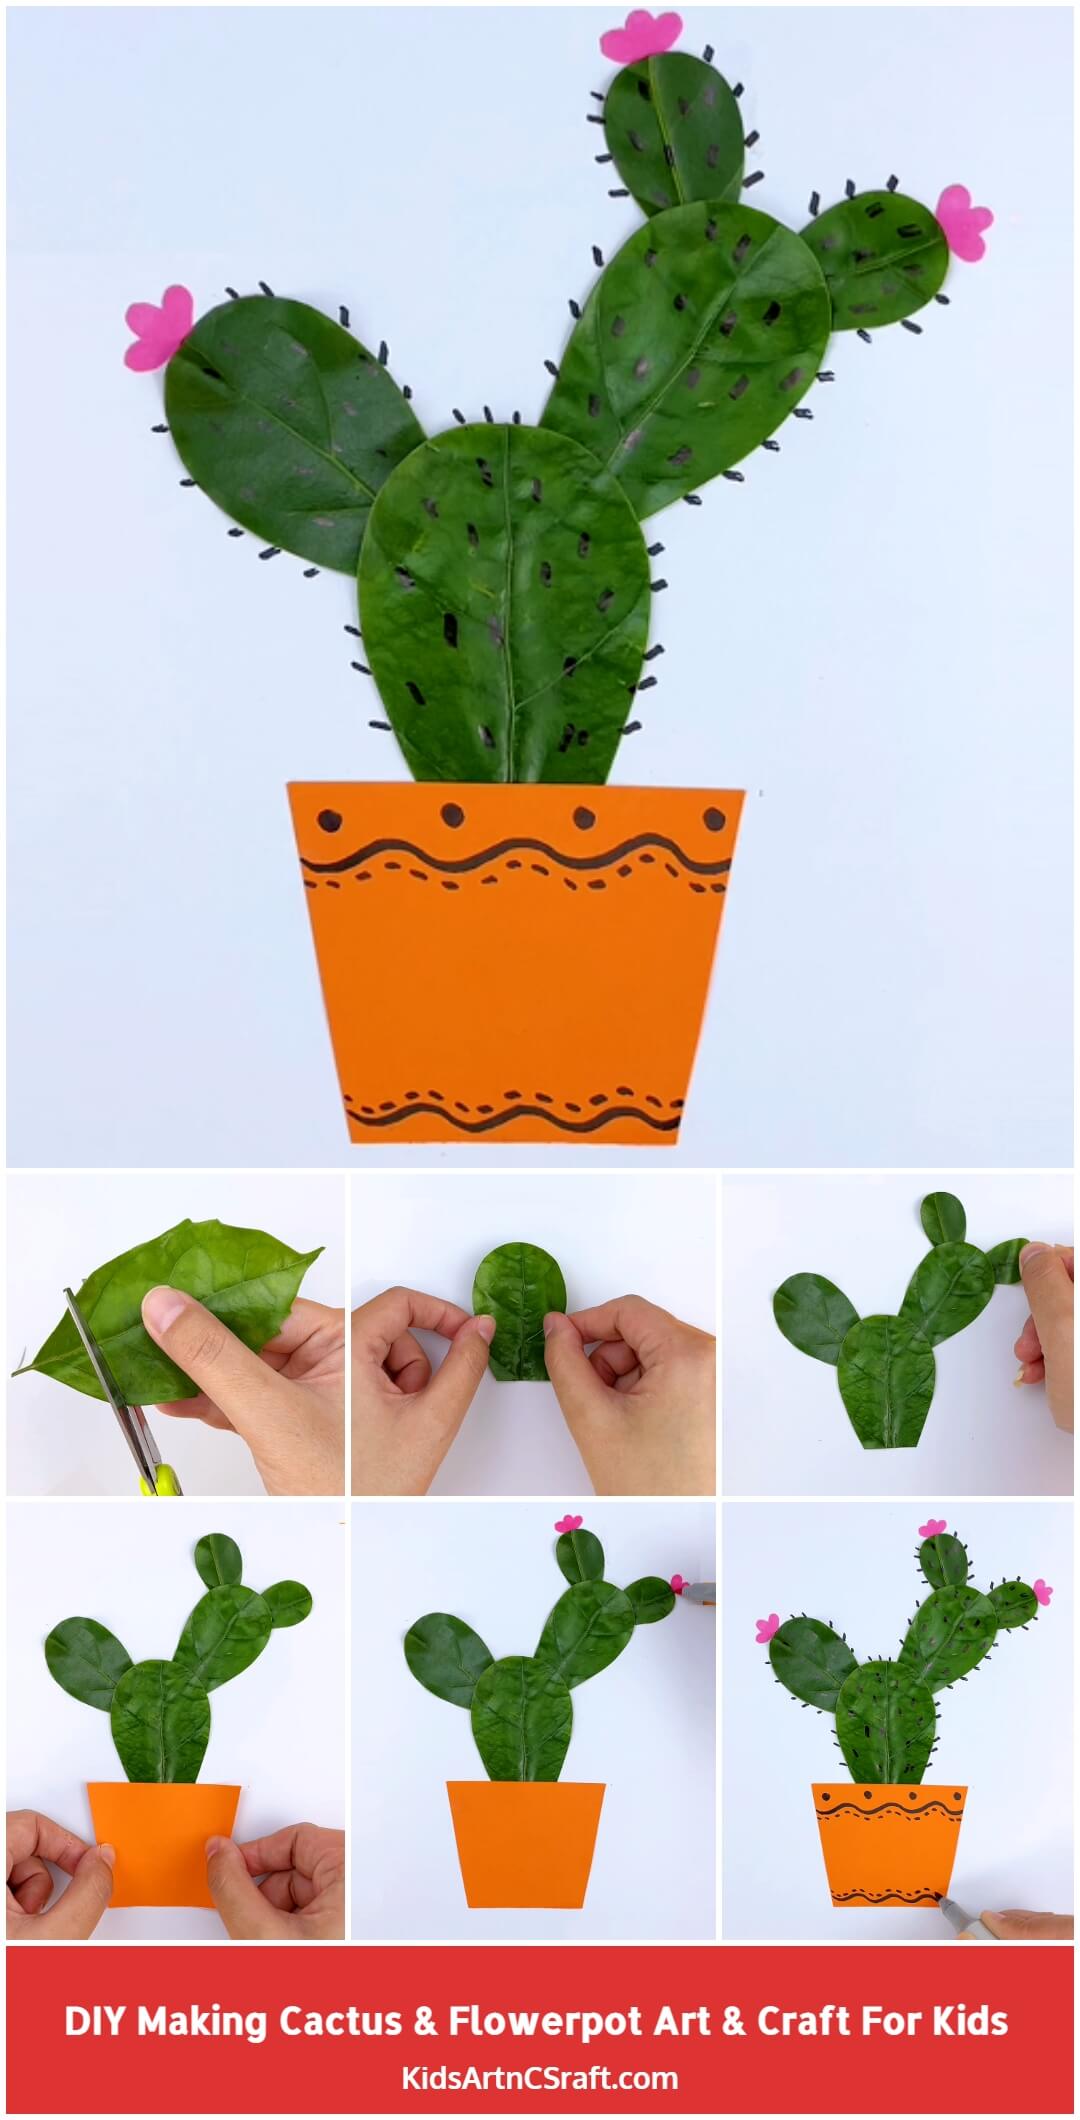 DIY Making Cactus and Flowerpot Art and Craft for Kids